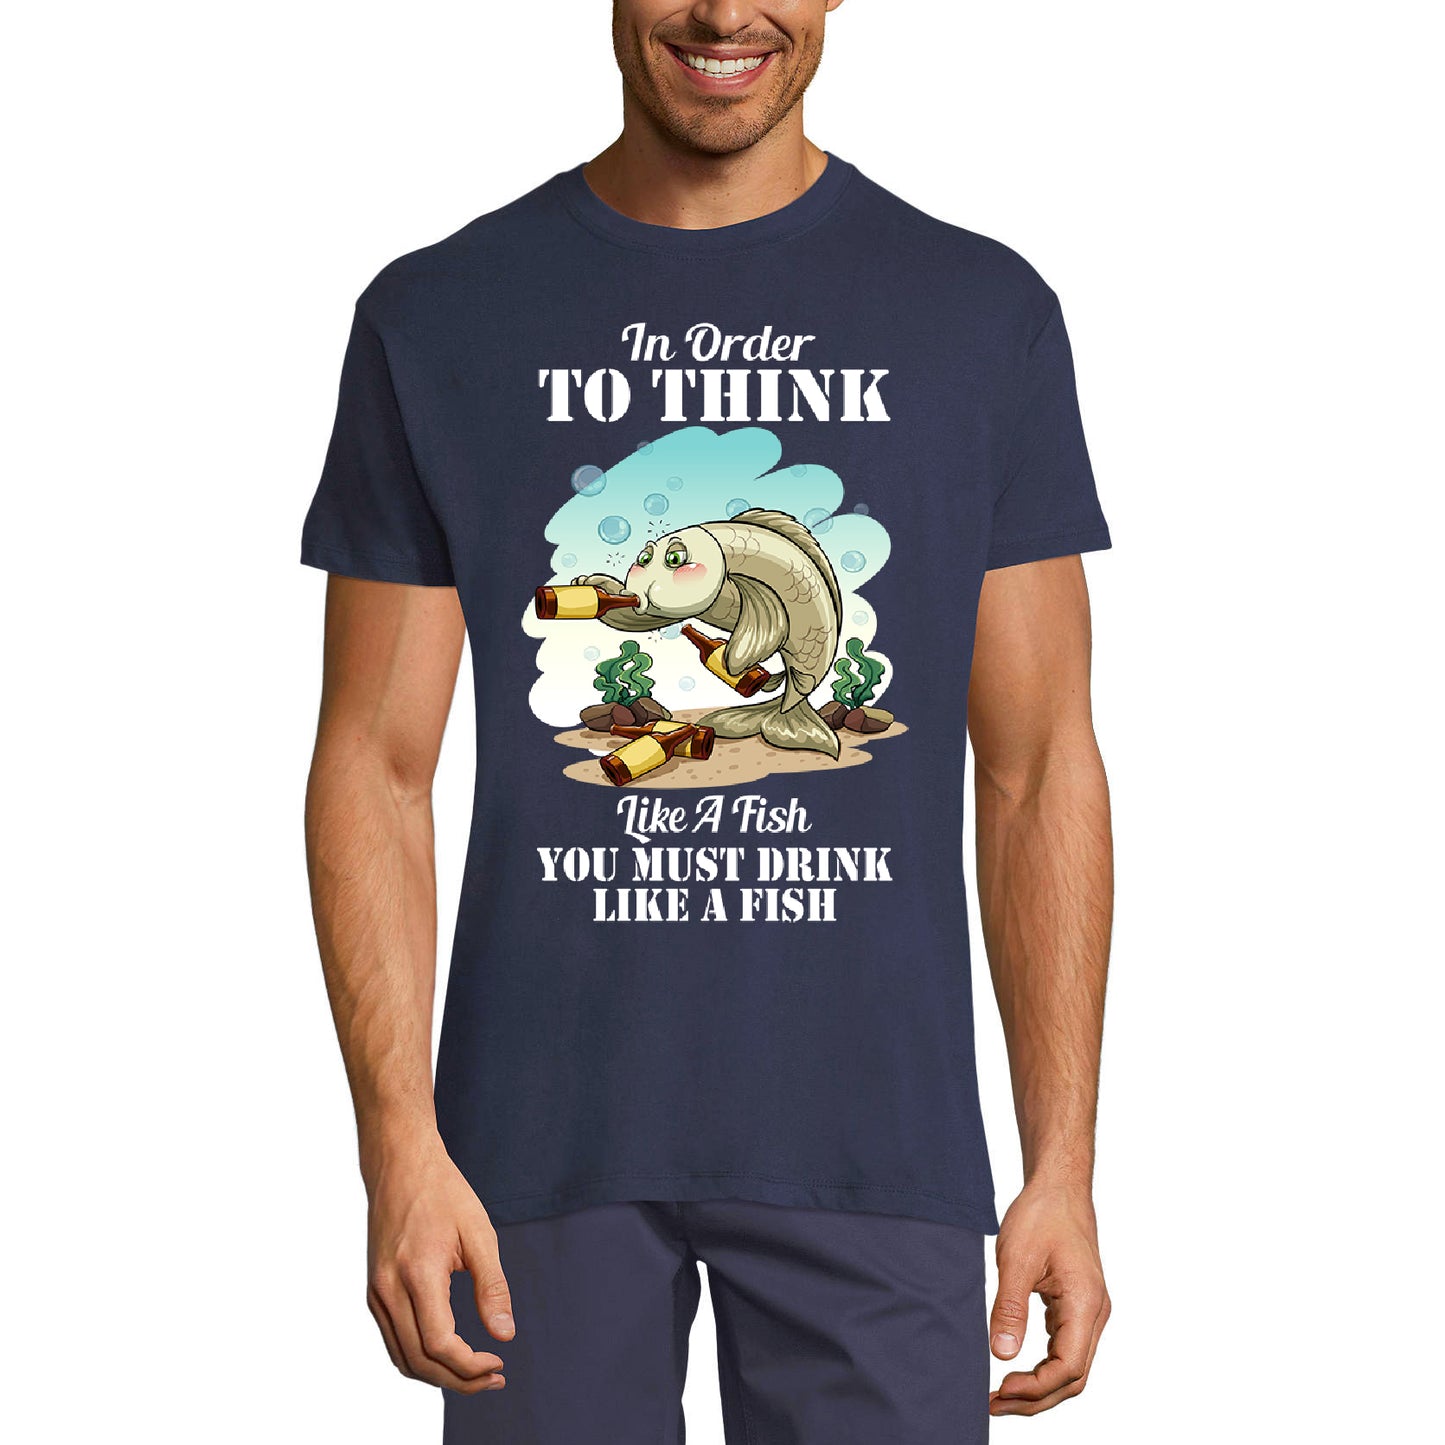 ULTRABASIC Herren-Humor-T-Shirt „In Order to Think Like a Fish – You Must Drink Like a Fish“ – lustiges Spruch-Bierliebhaber-T-Shirt